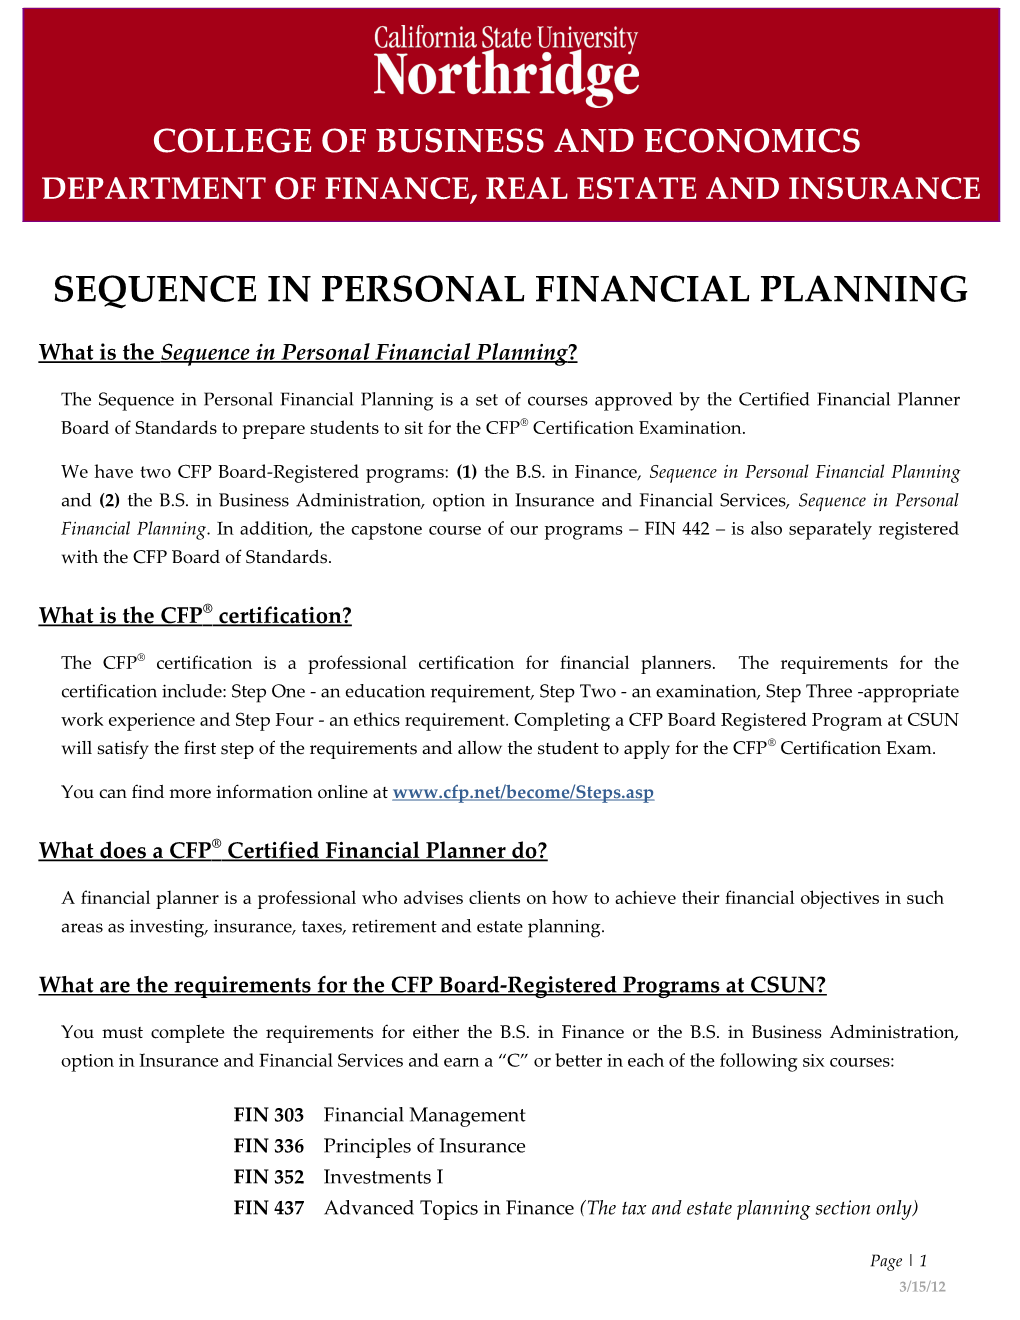 Sequence in Personal Financial Planning